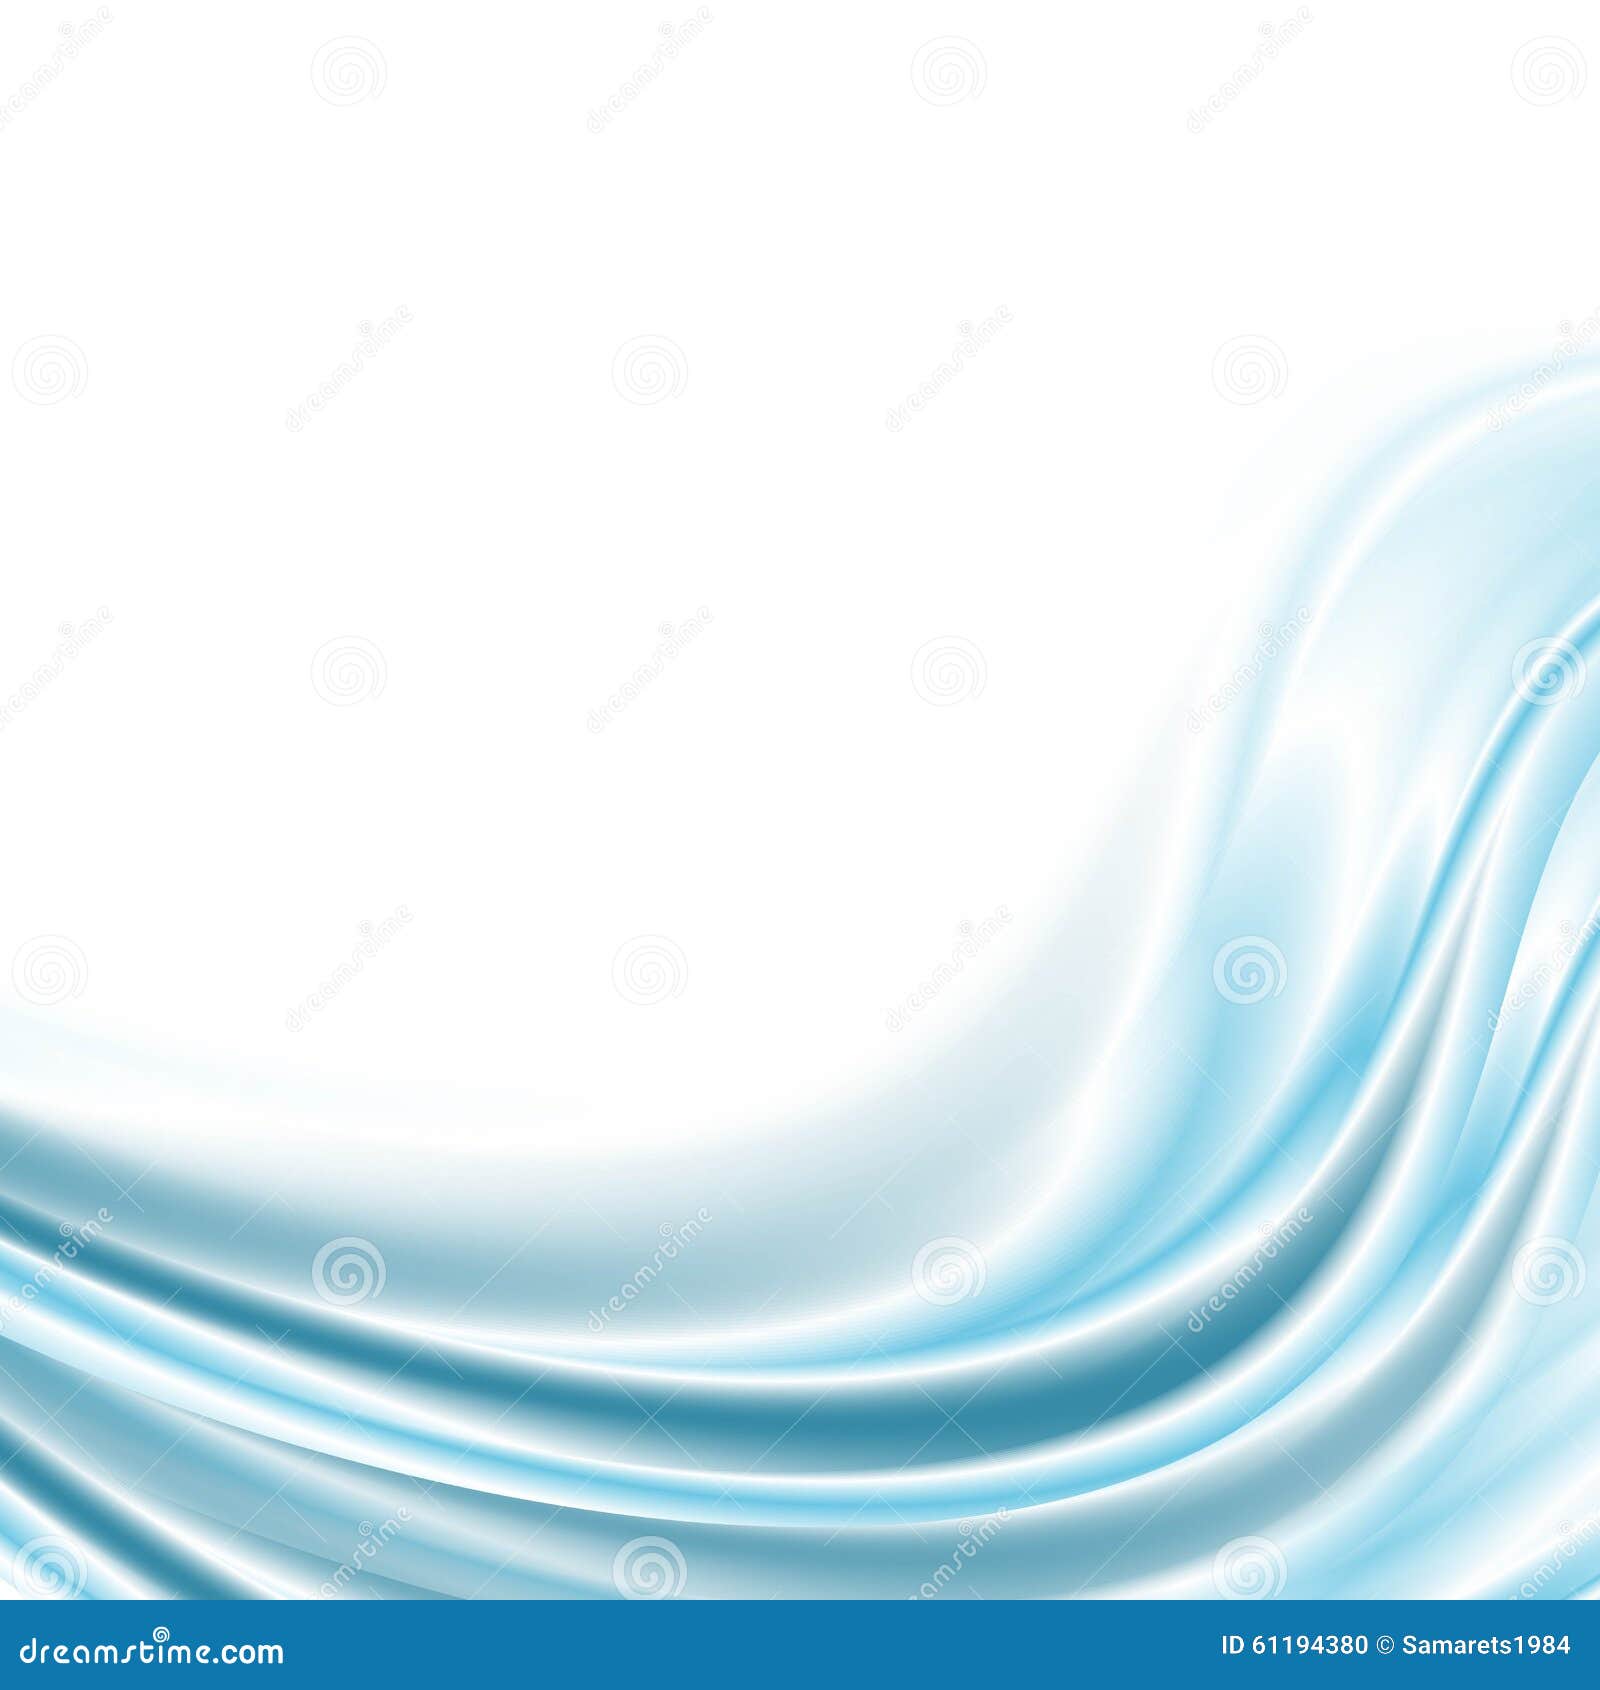 Vector Abstract Blue Wave Background Stock Vector - Illustration of